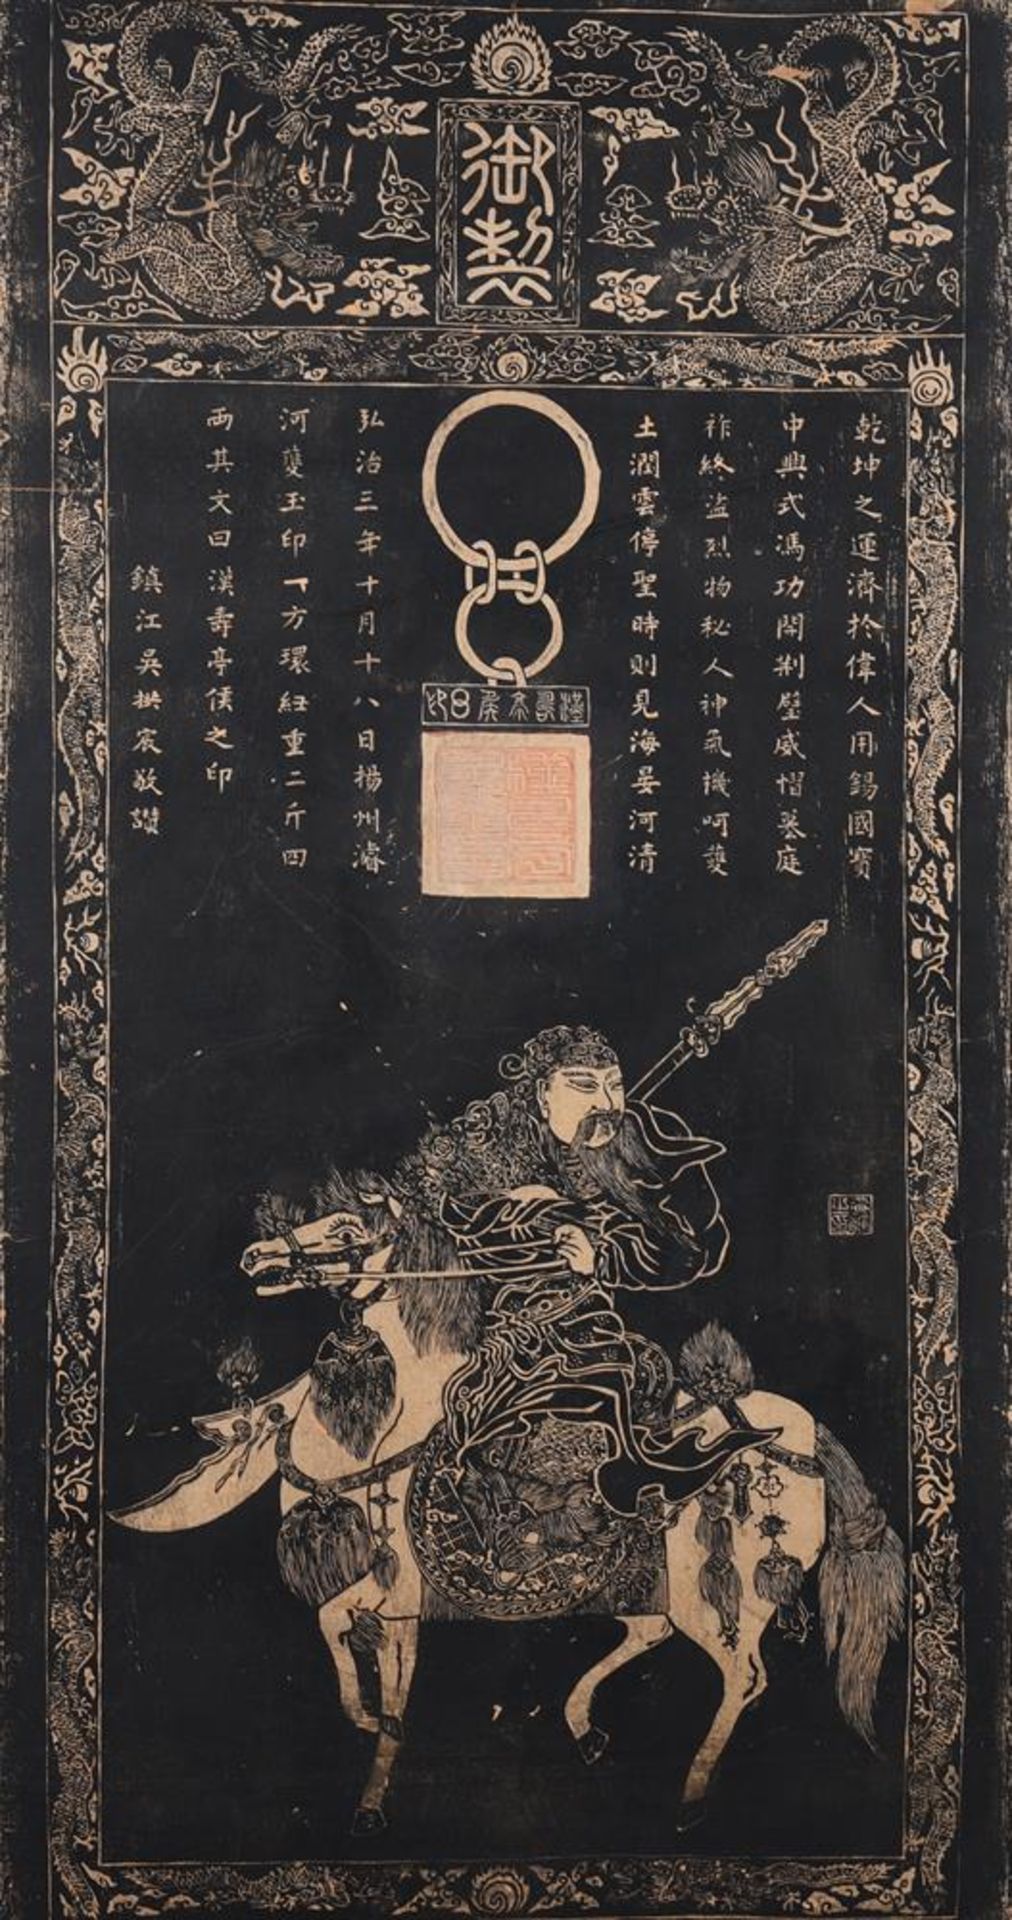 An Epitaph rubbing of Governor Guan Yu